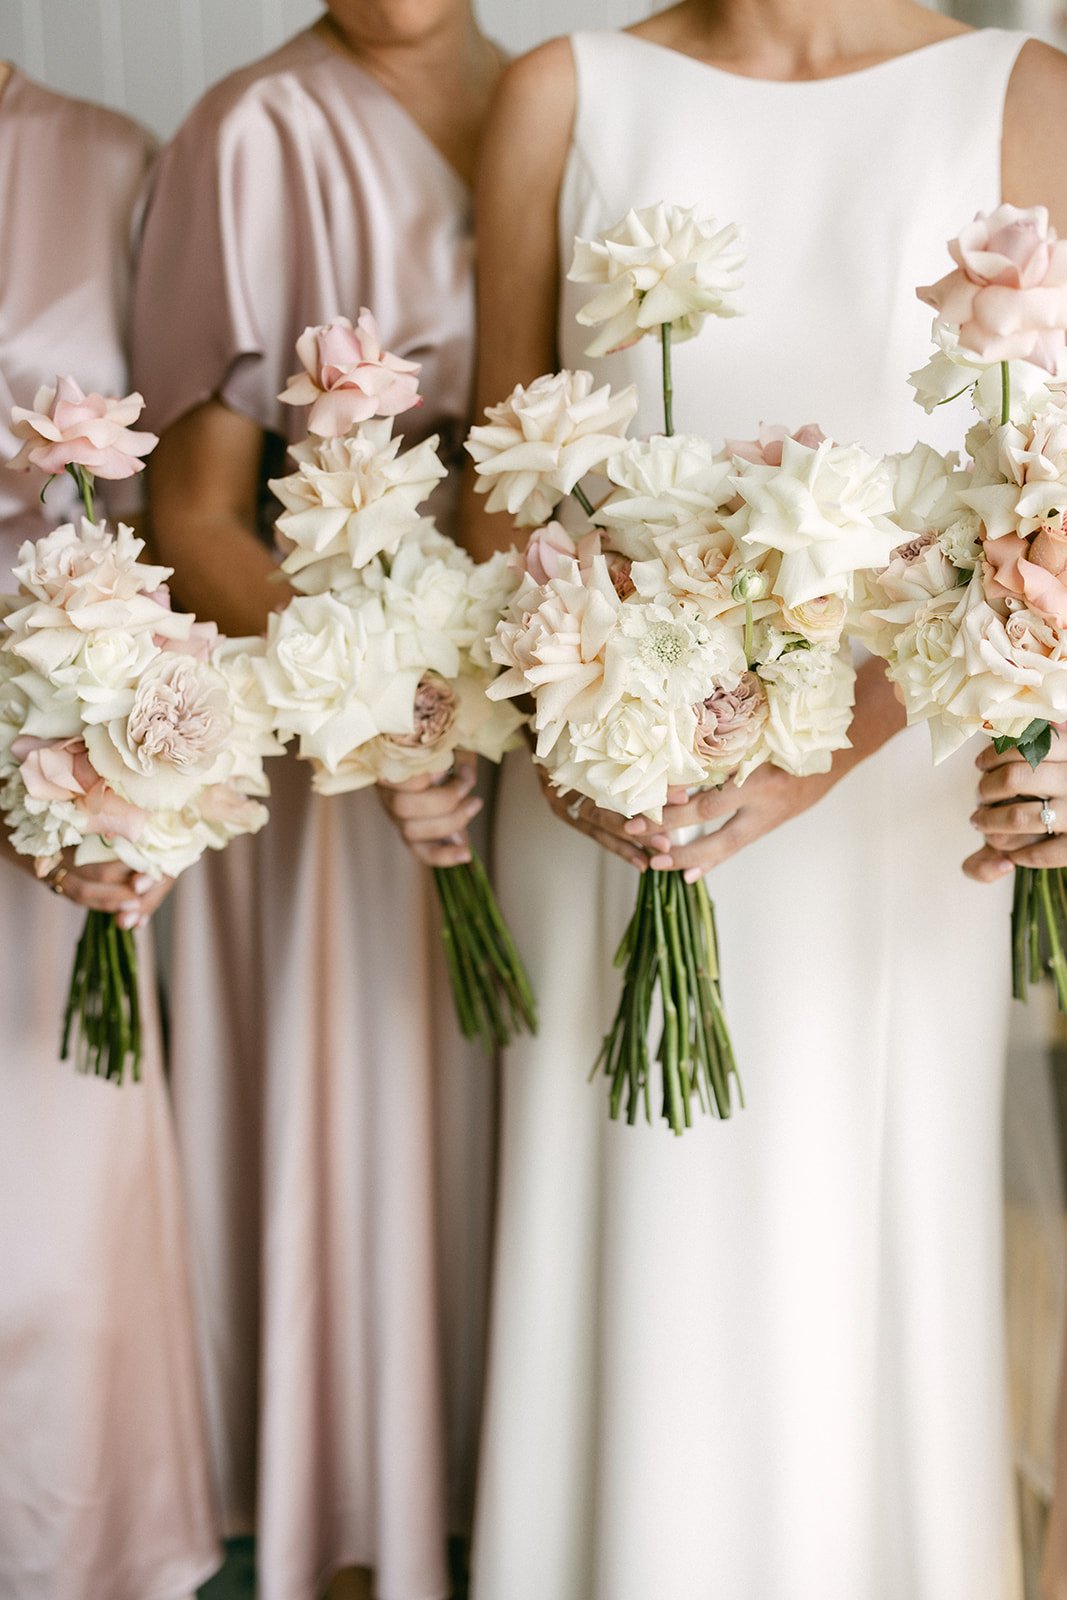 A photograph of a bride and her bridesmaids bouquets. They are a mix of soft pink and white